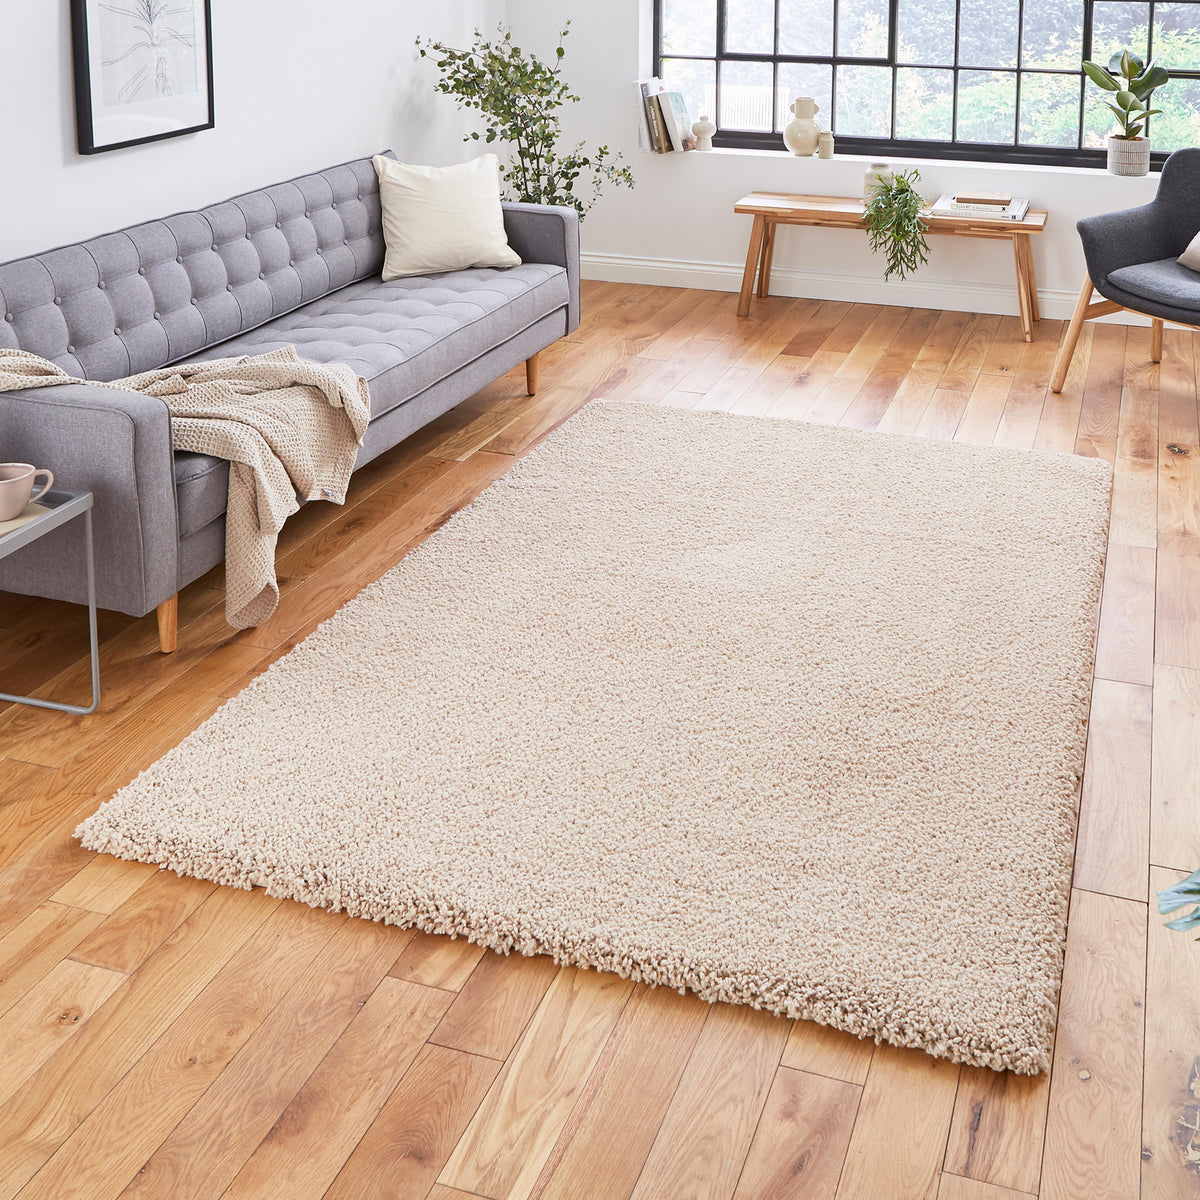 Roswell Camel Stain Resistant Shaggy Rug for living room